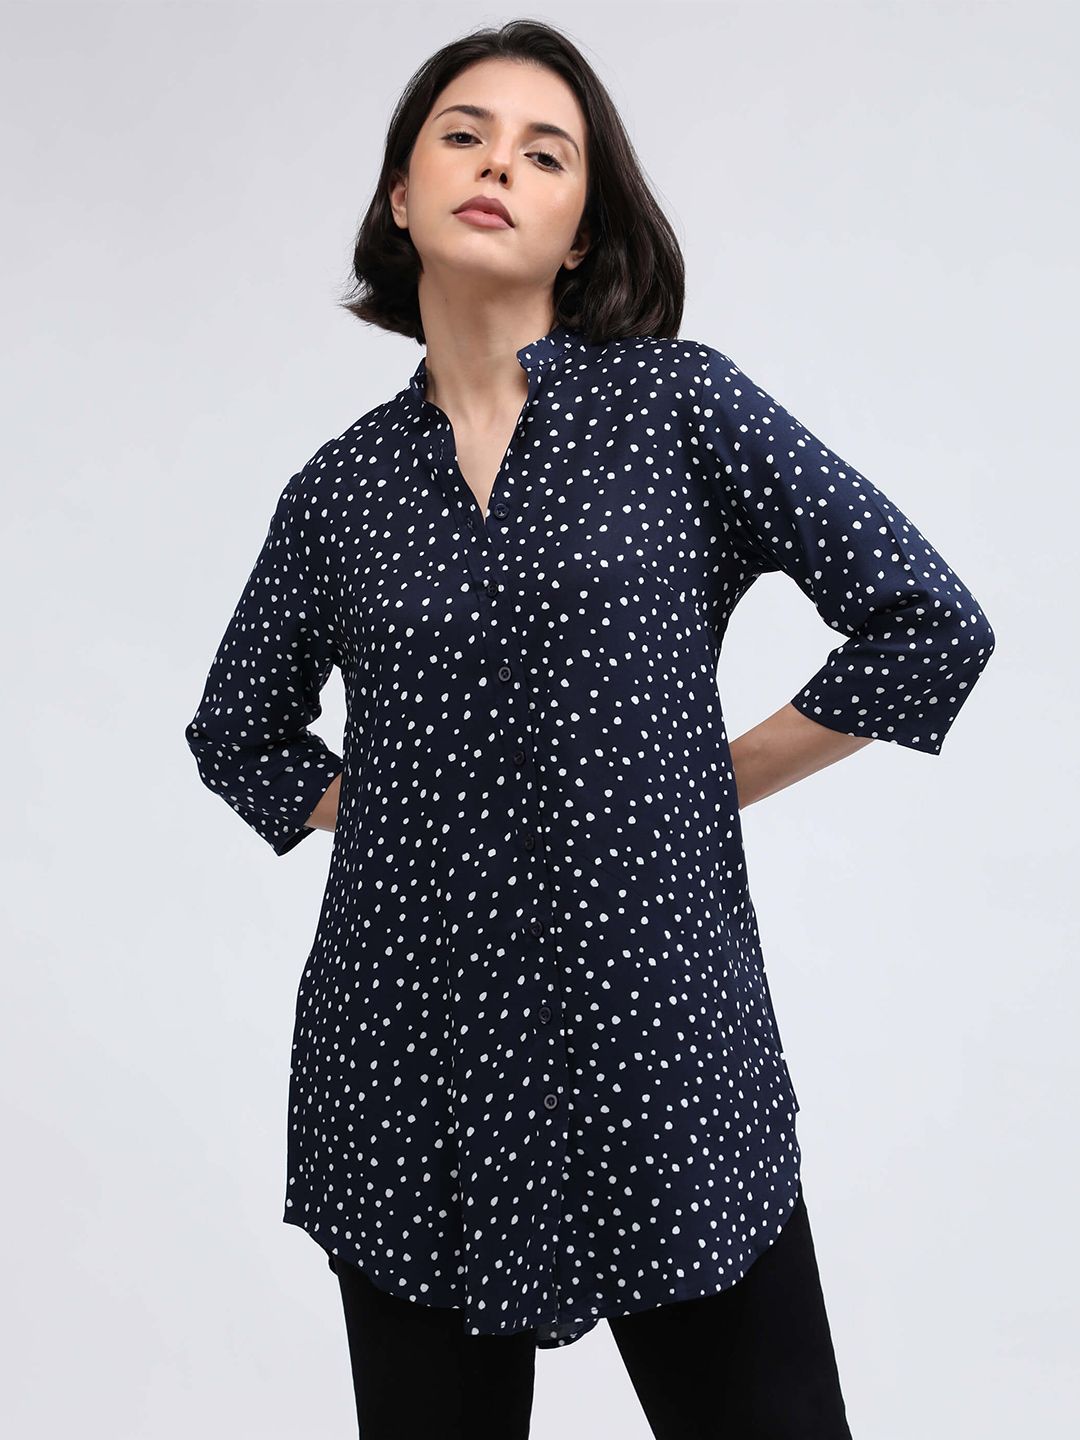 IDK Abstract Print Shirt Style Top Price in India